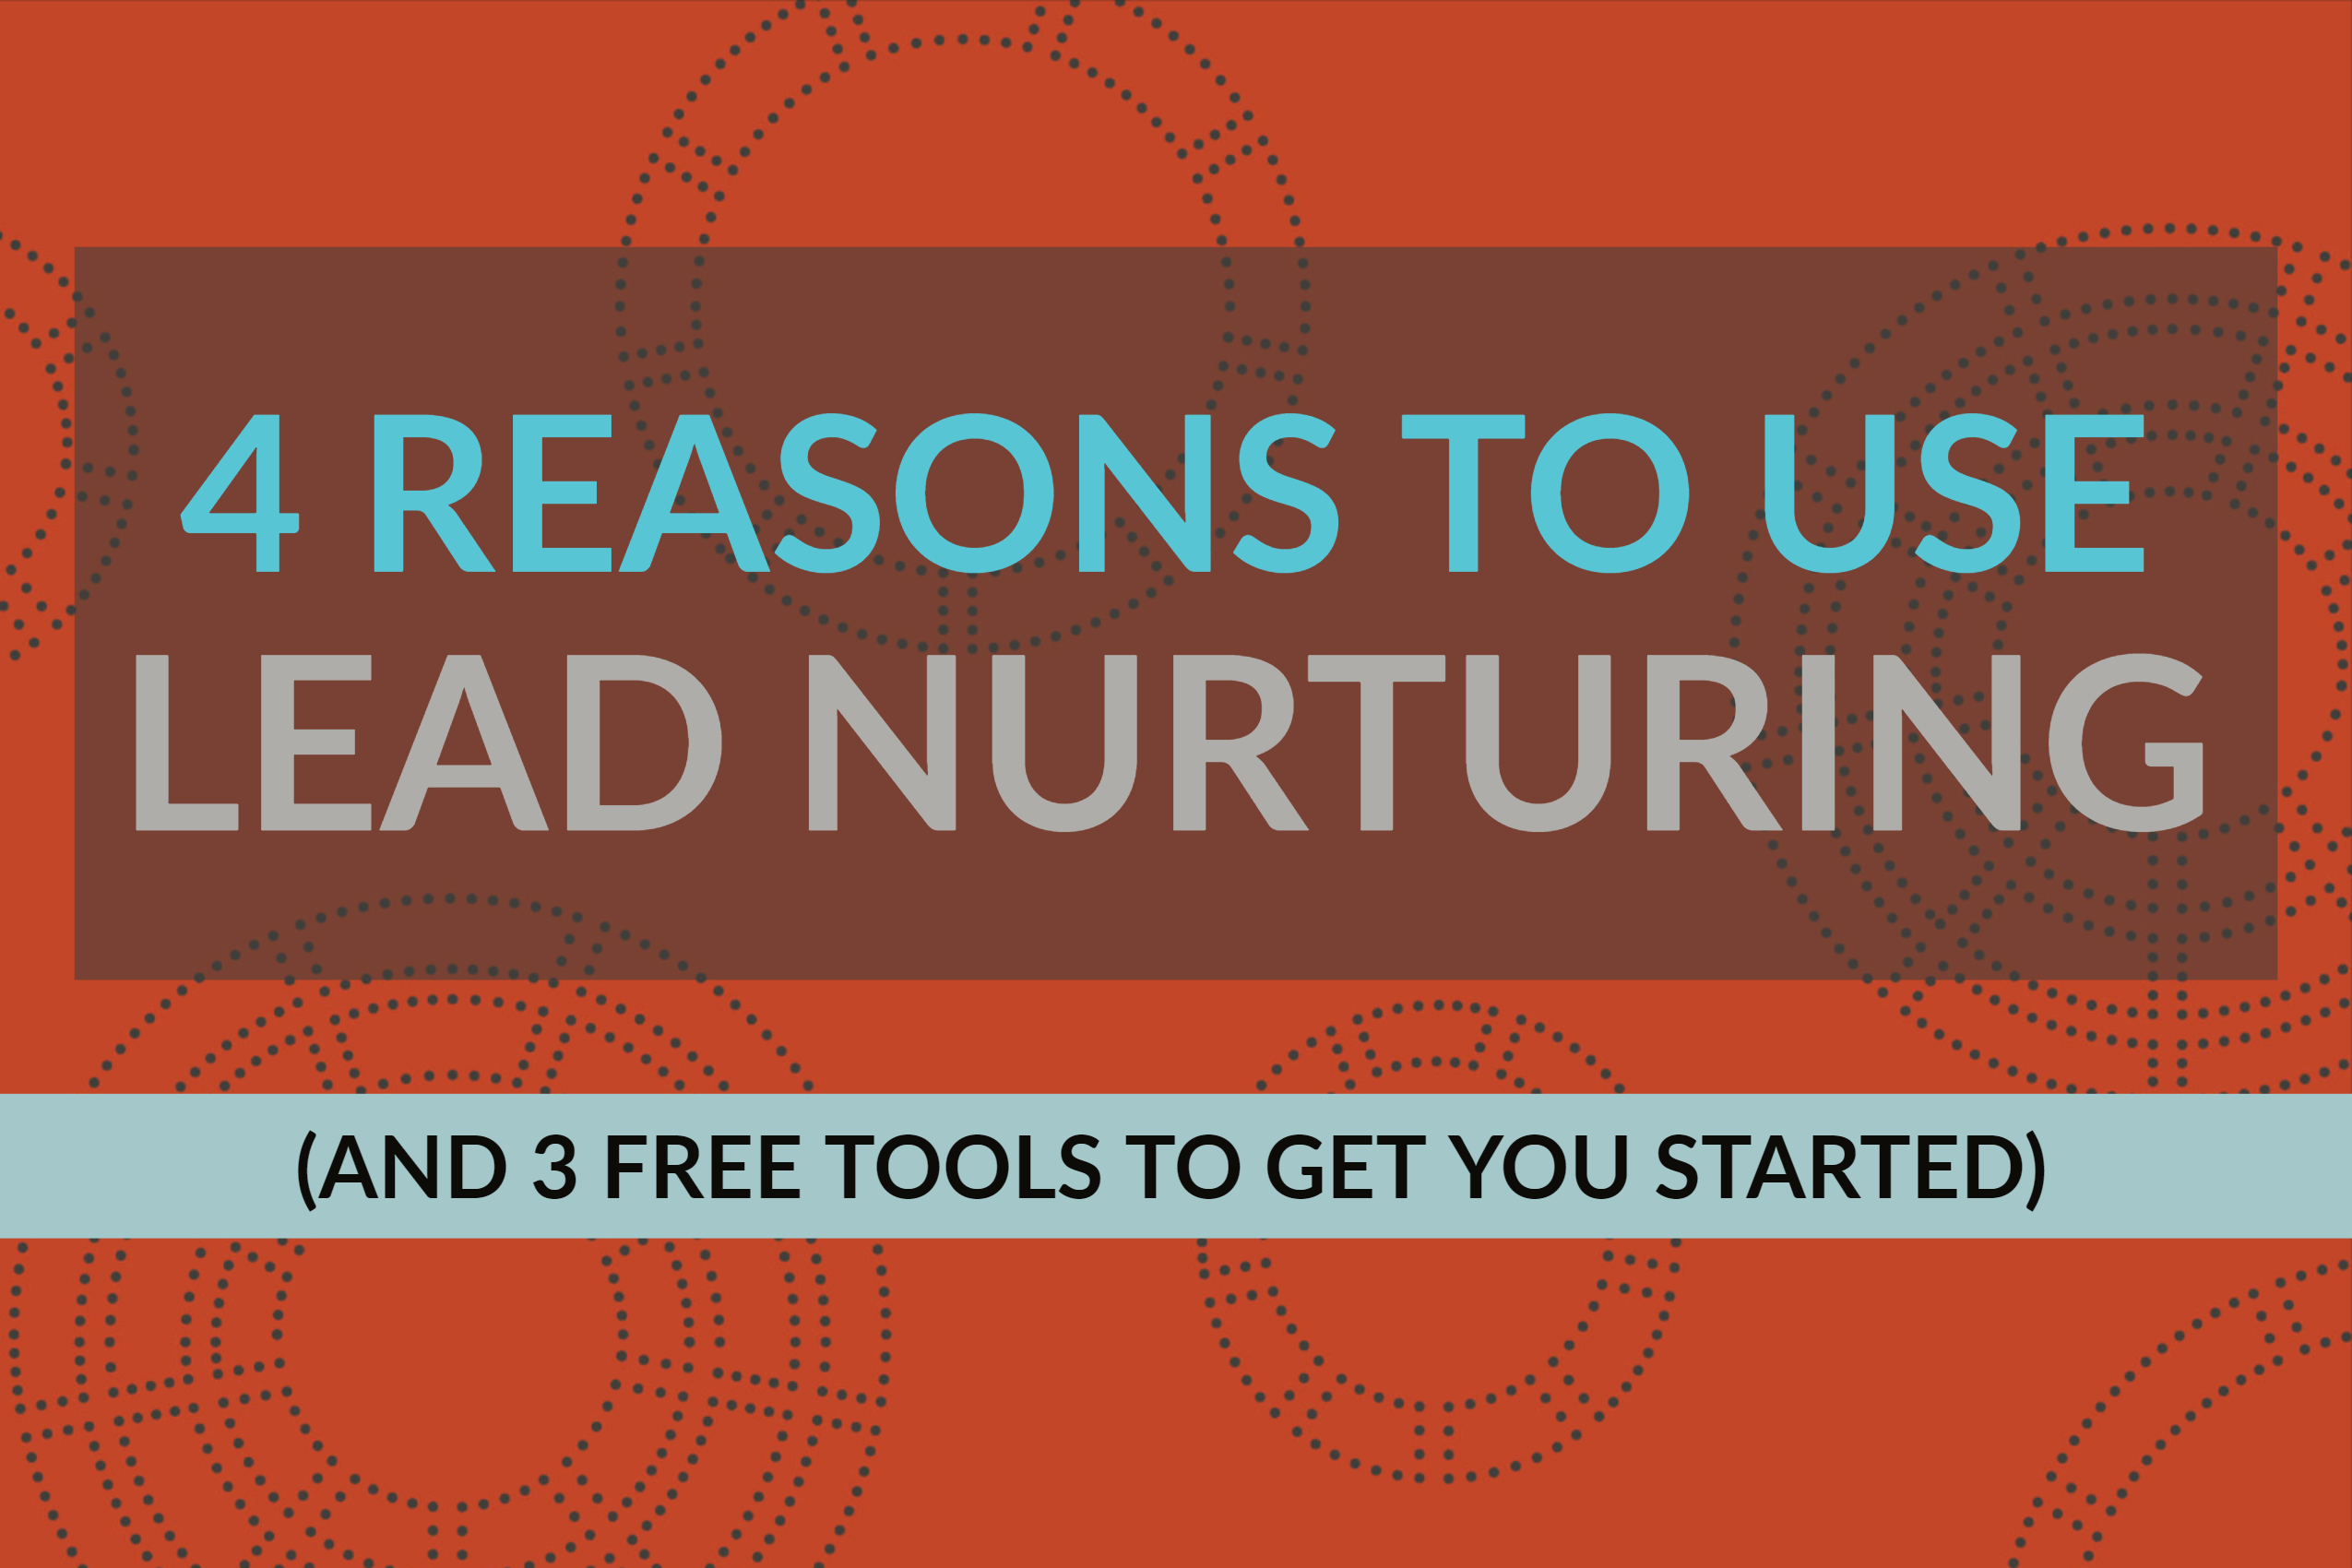 4 Reasons To Use Lead Nurturing (And 3 Free Tools To Get You Started)